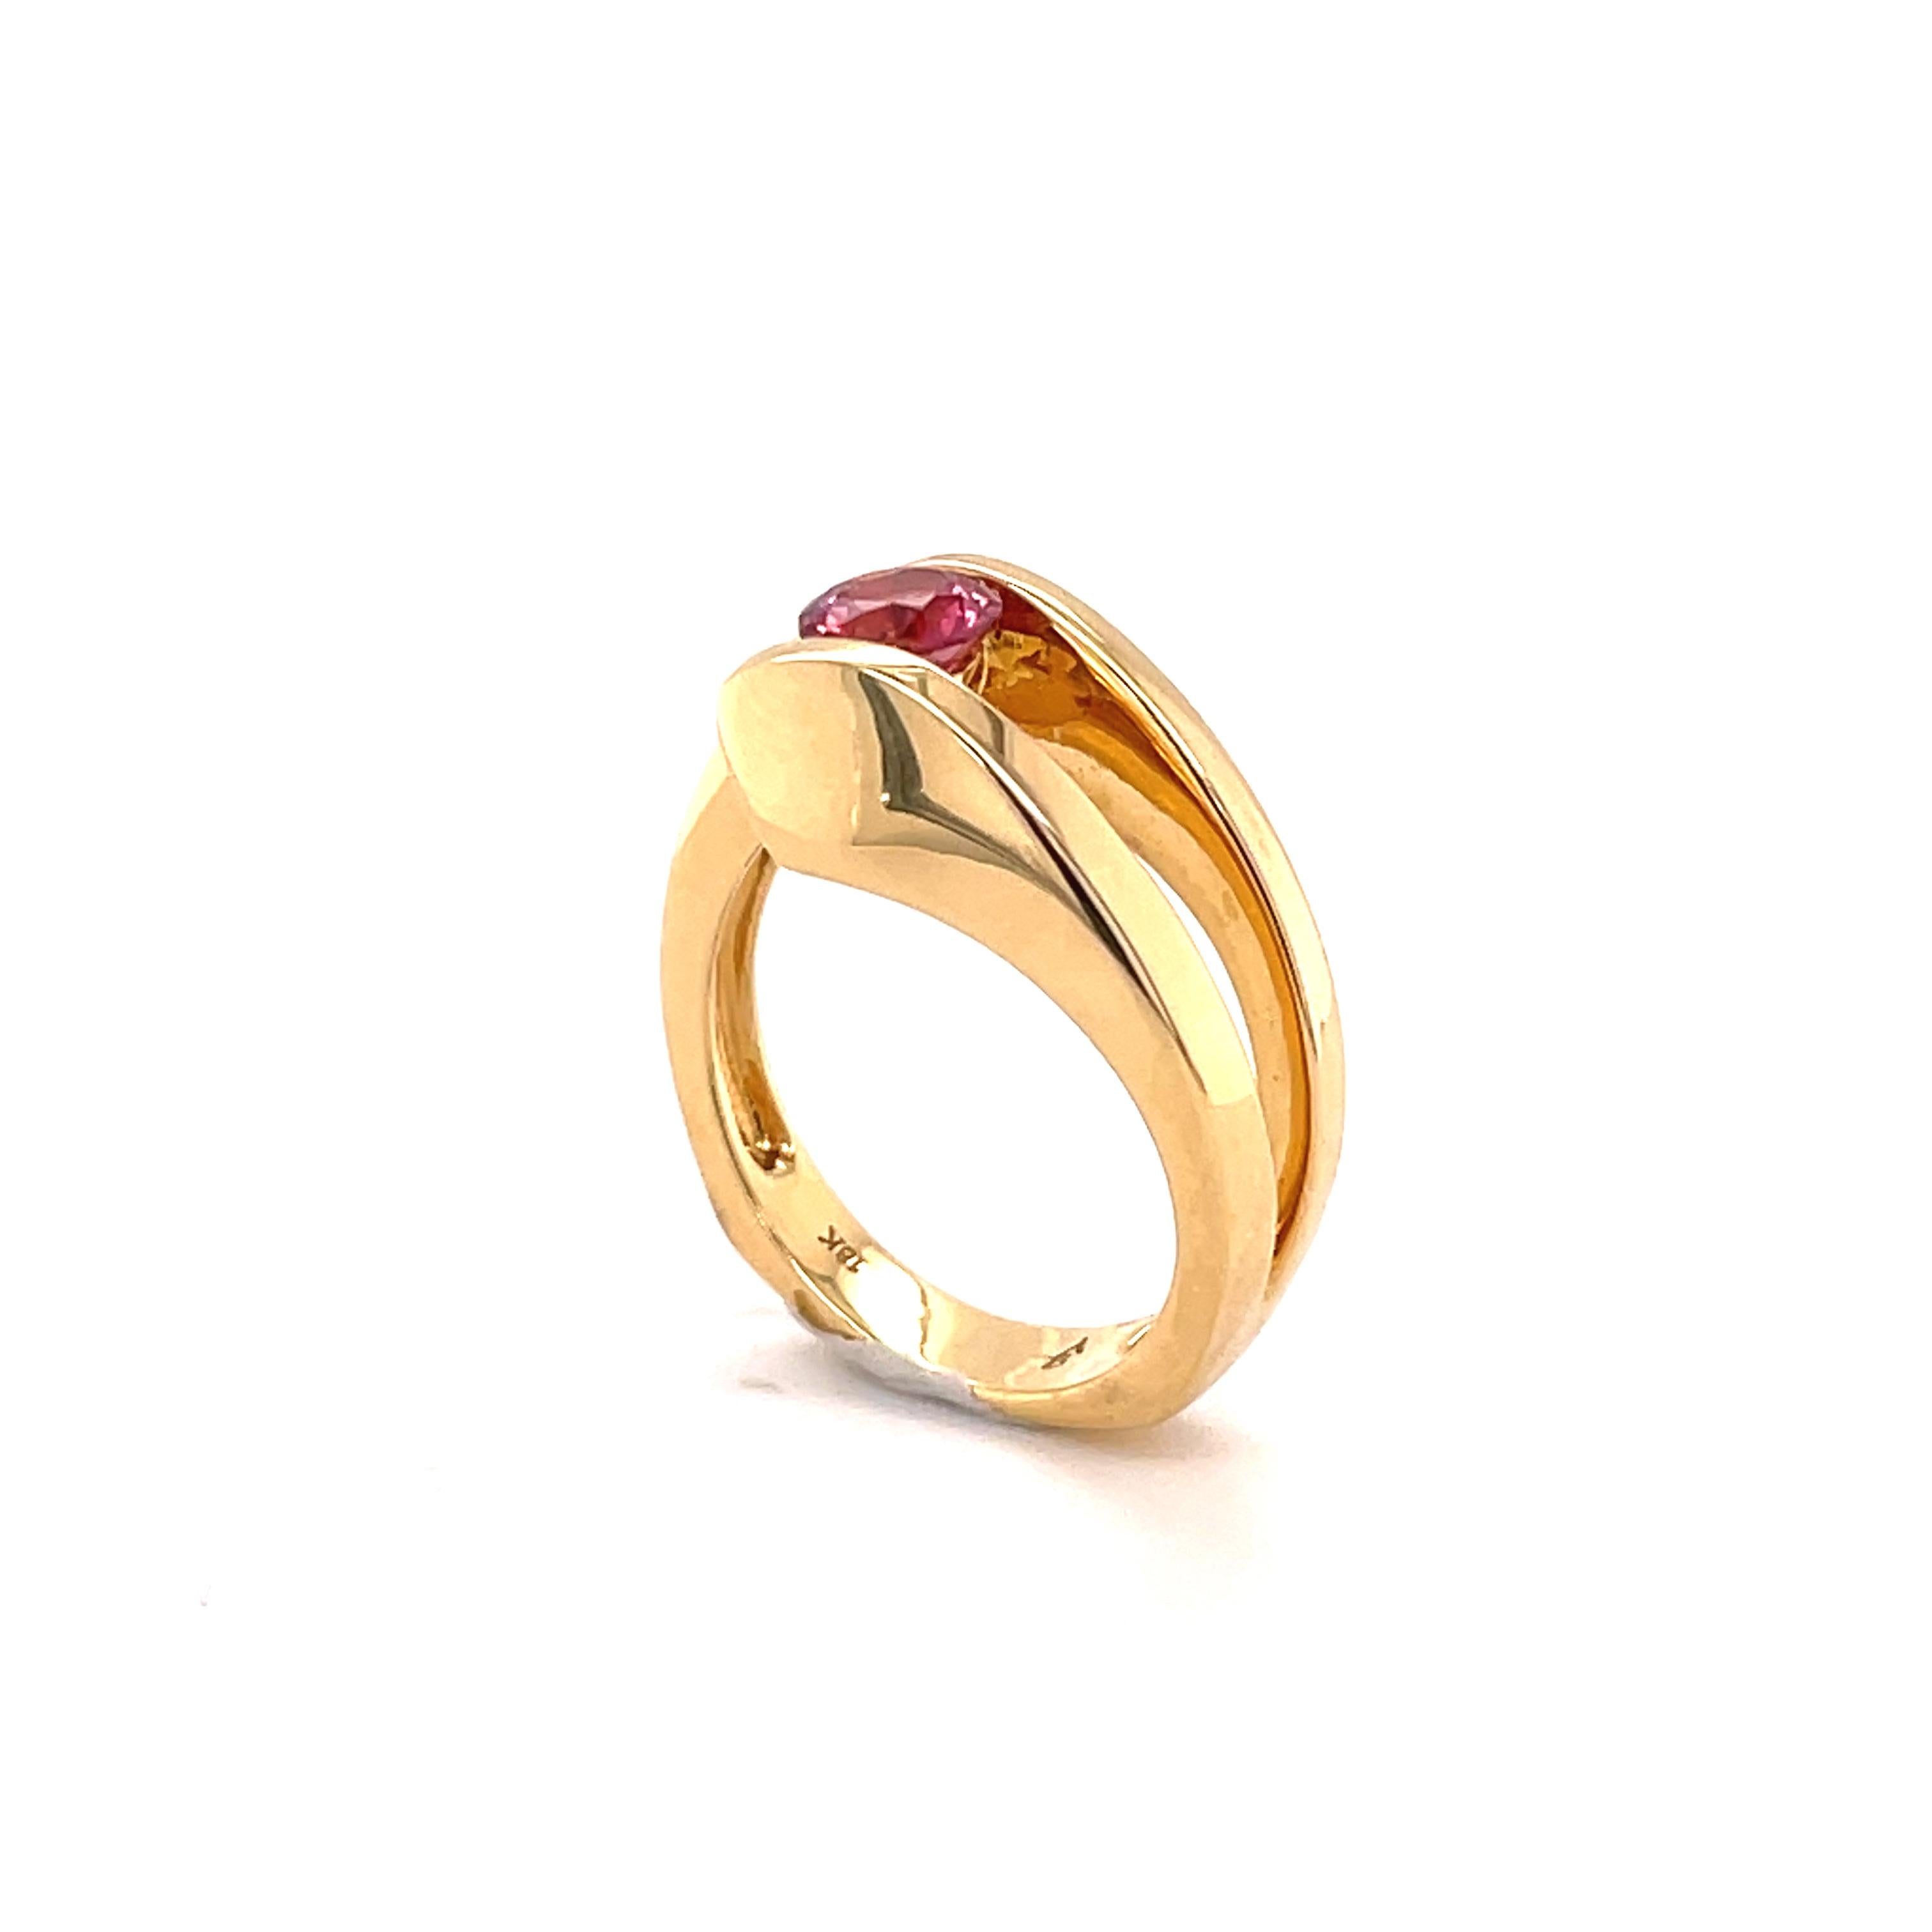 Contemporary 0.72 Carat Orangey-Pink Spinel and Diamond Gold Ring